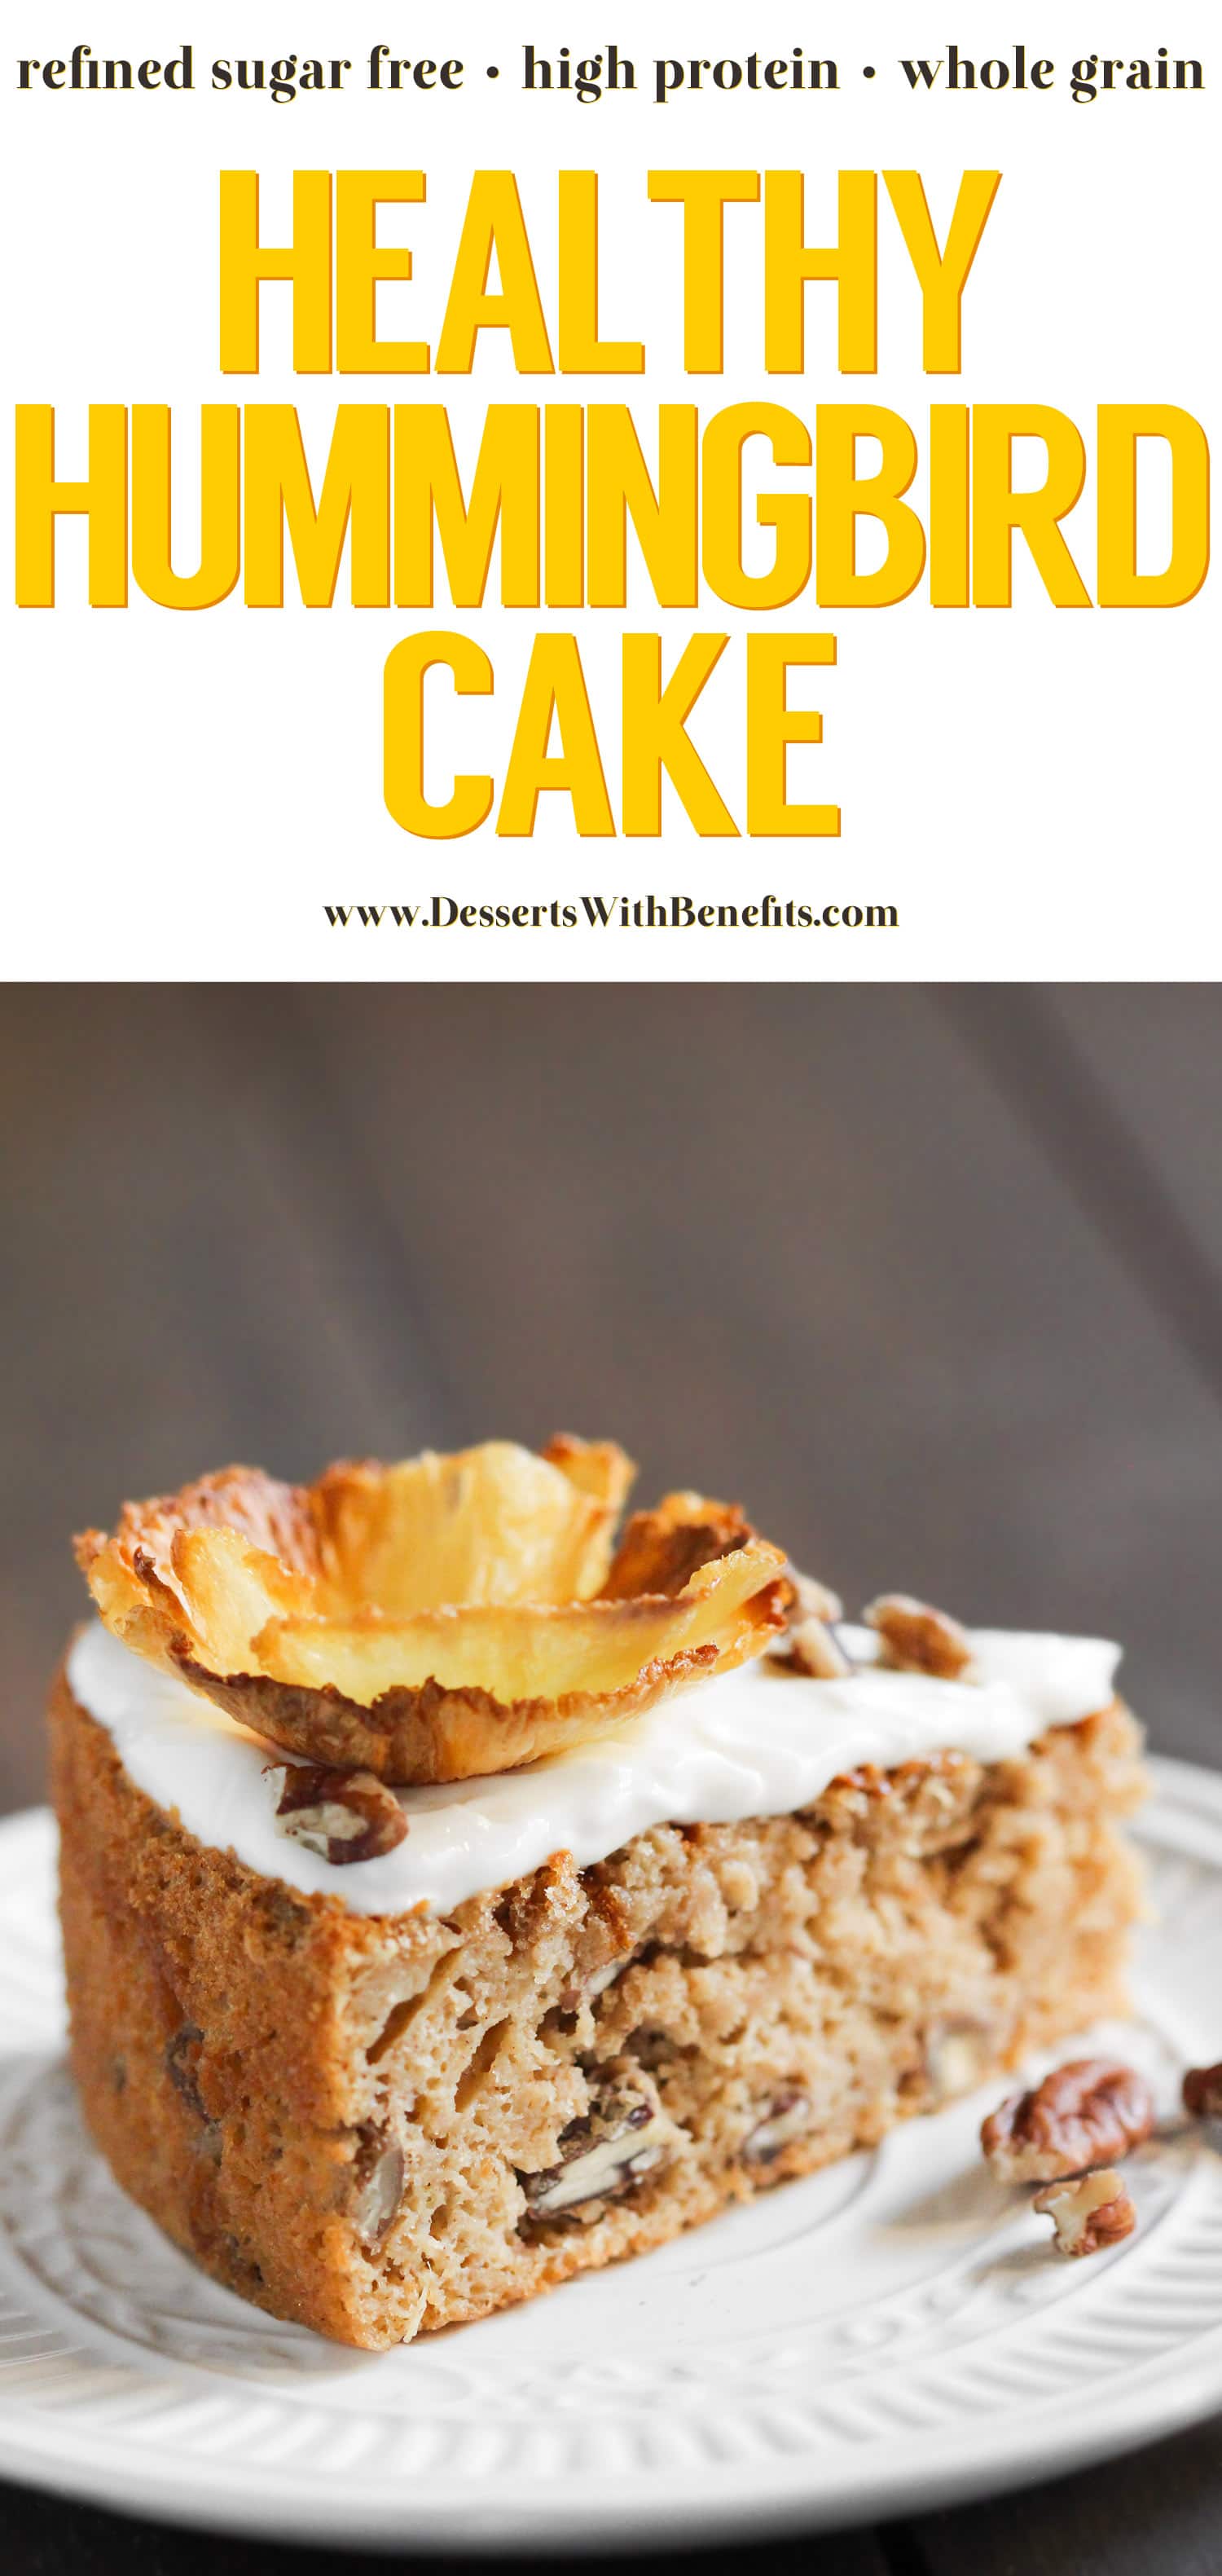 Hummingbird Cake is full of pineapple, banana, and pecans... and lots of calories and fat too. But NOT this one! This HEALTHY Hummingbird Cake so delicious, sweet, moist, and decadent, you'd never know it's lower calorie, lower fat, and lower sugar than the original. Healthy Dessert Recipes with sugar free, low calorie, low fat, low carb, high protein, gluten free, dairy free, and vegan options at the Desserts With Benefits Blog (www.DessertsWithBenefits.com)